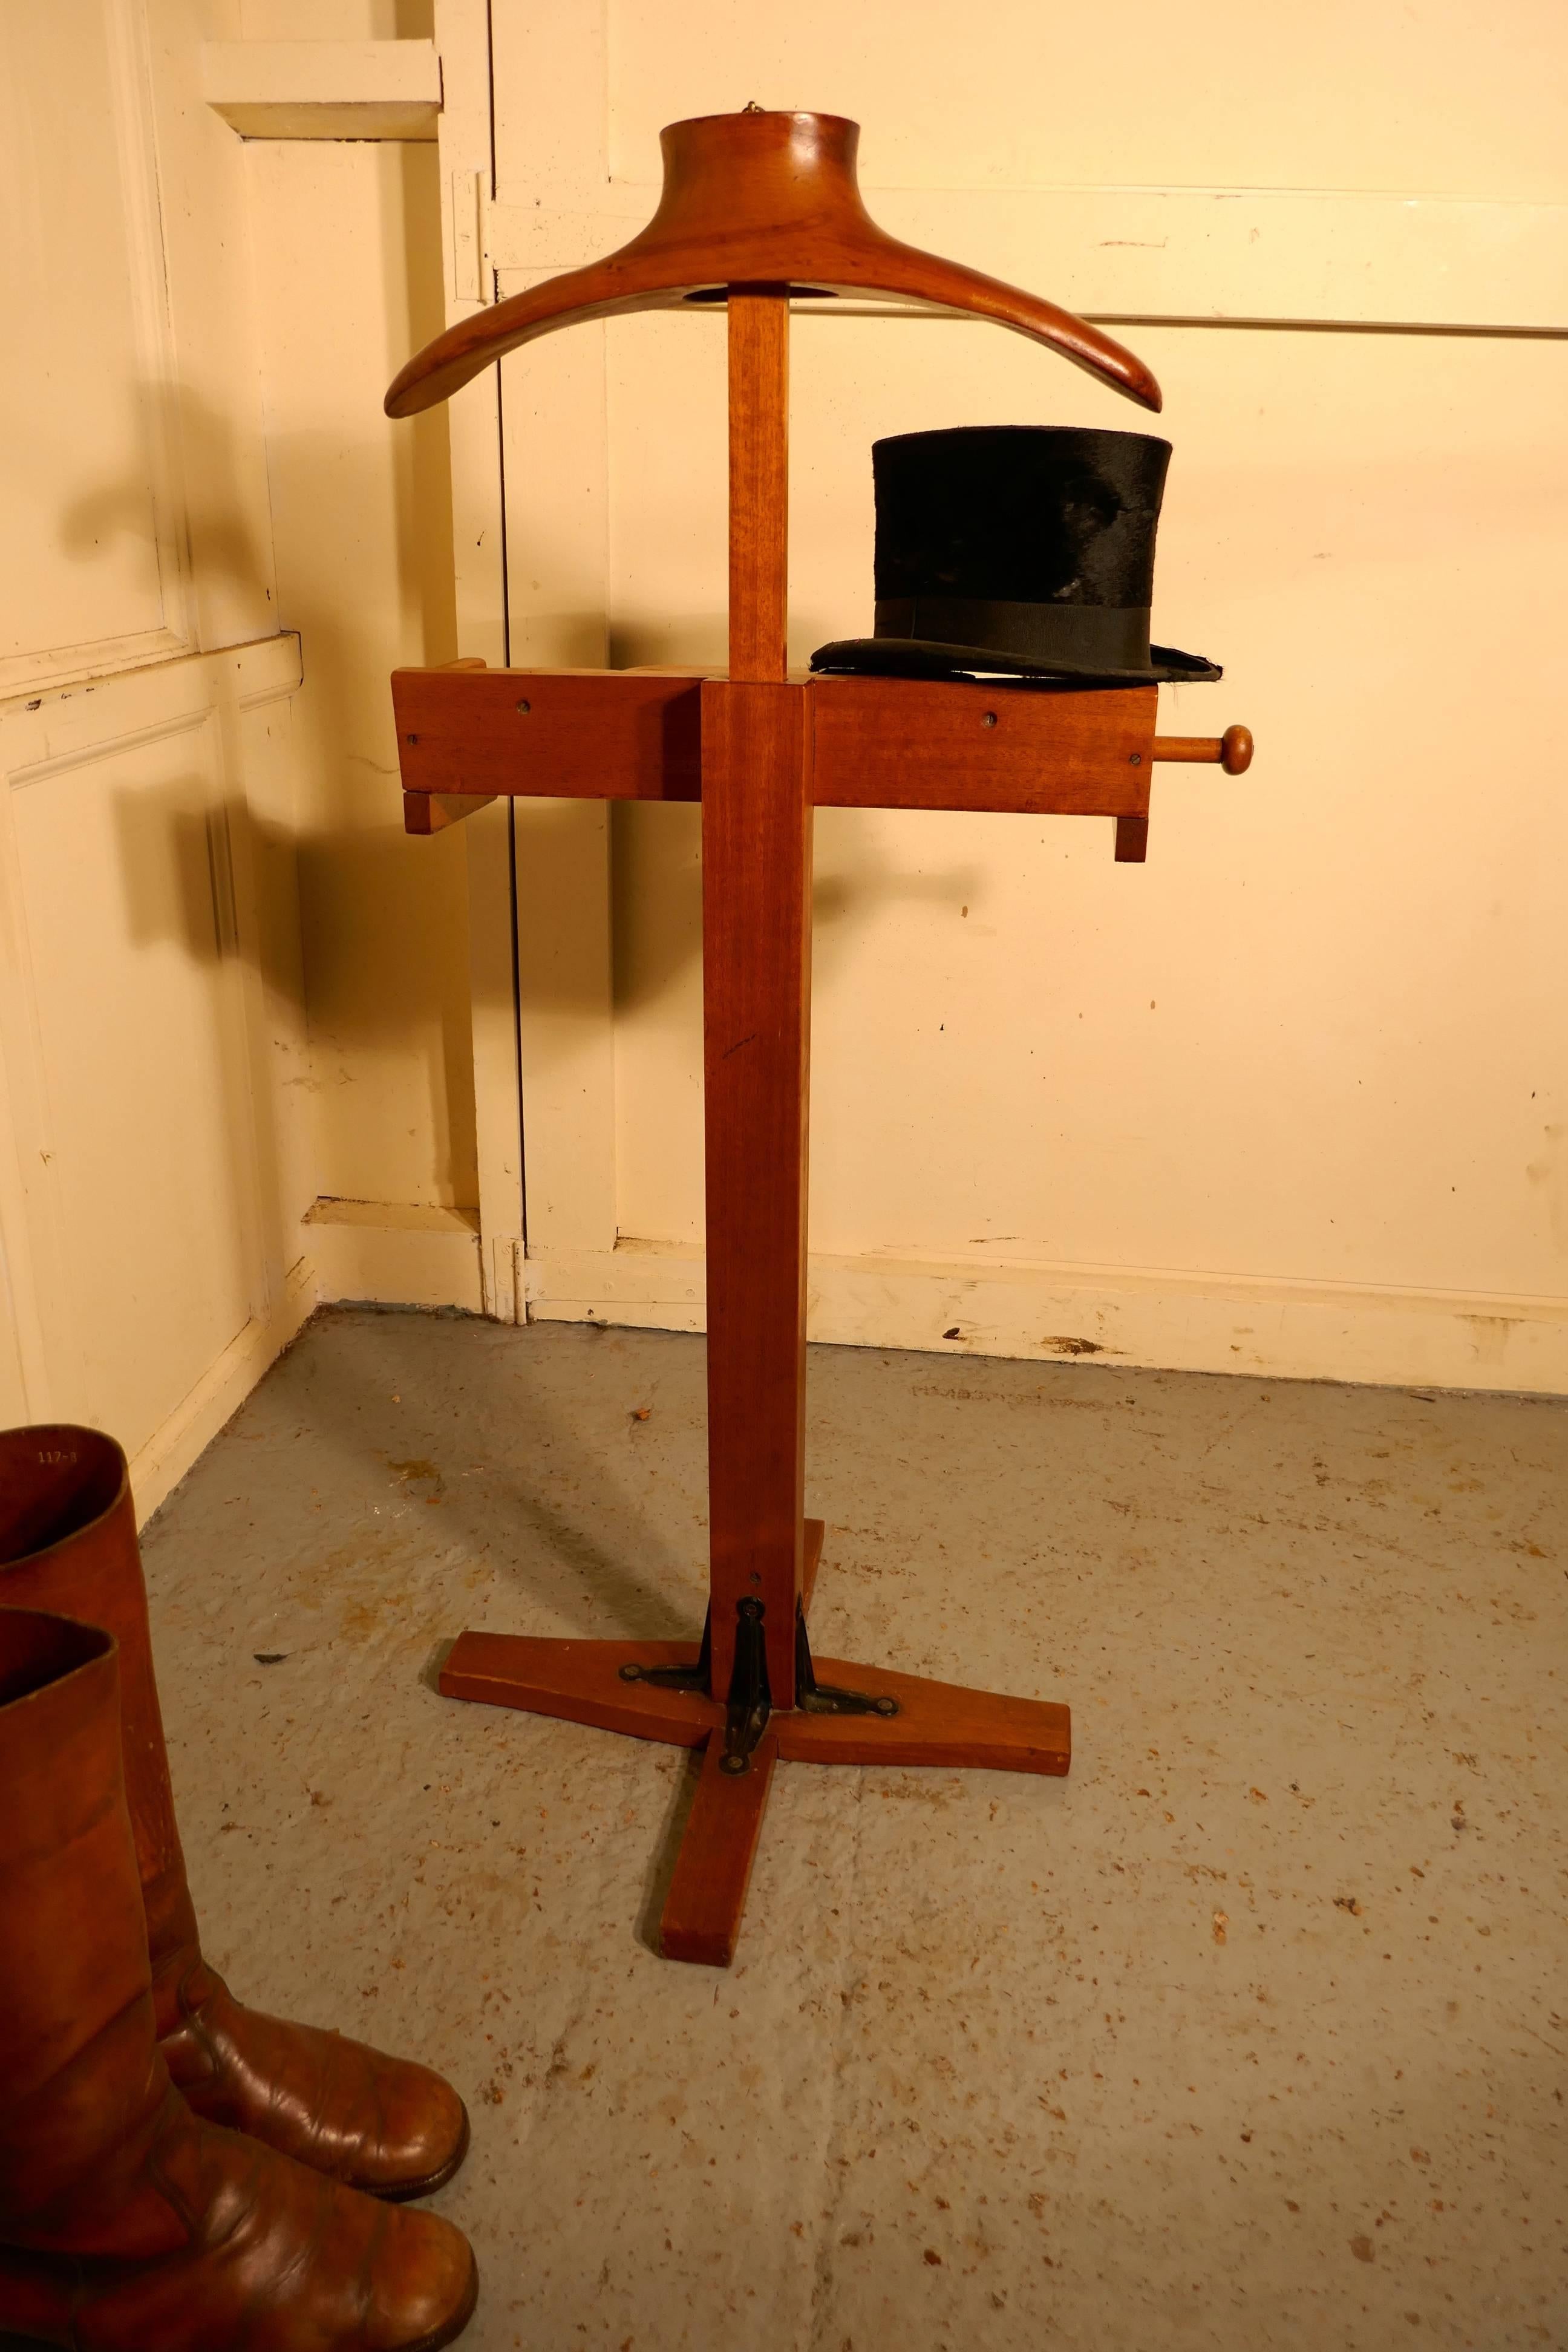 Gentleman’s suit hanger or nightstand, dumb butler
A very useful piece, the hanger or clothes stand is made in Golden Beech, the Coat hanger has a height adjustment and below there is a trouser hanging rail with a shelf which has cufflink and